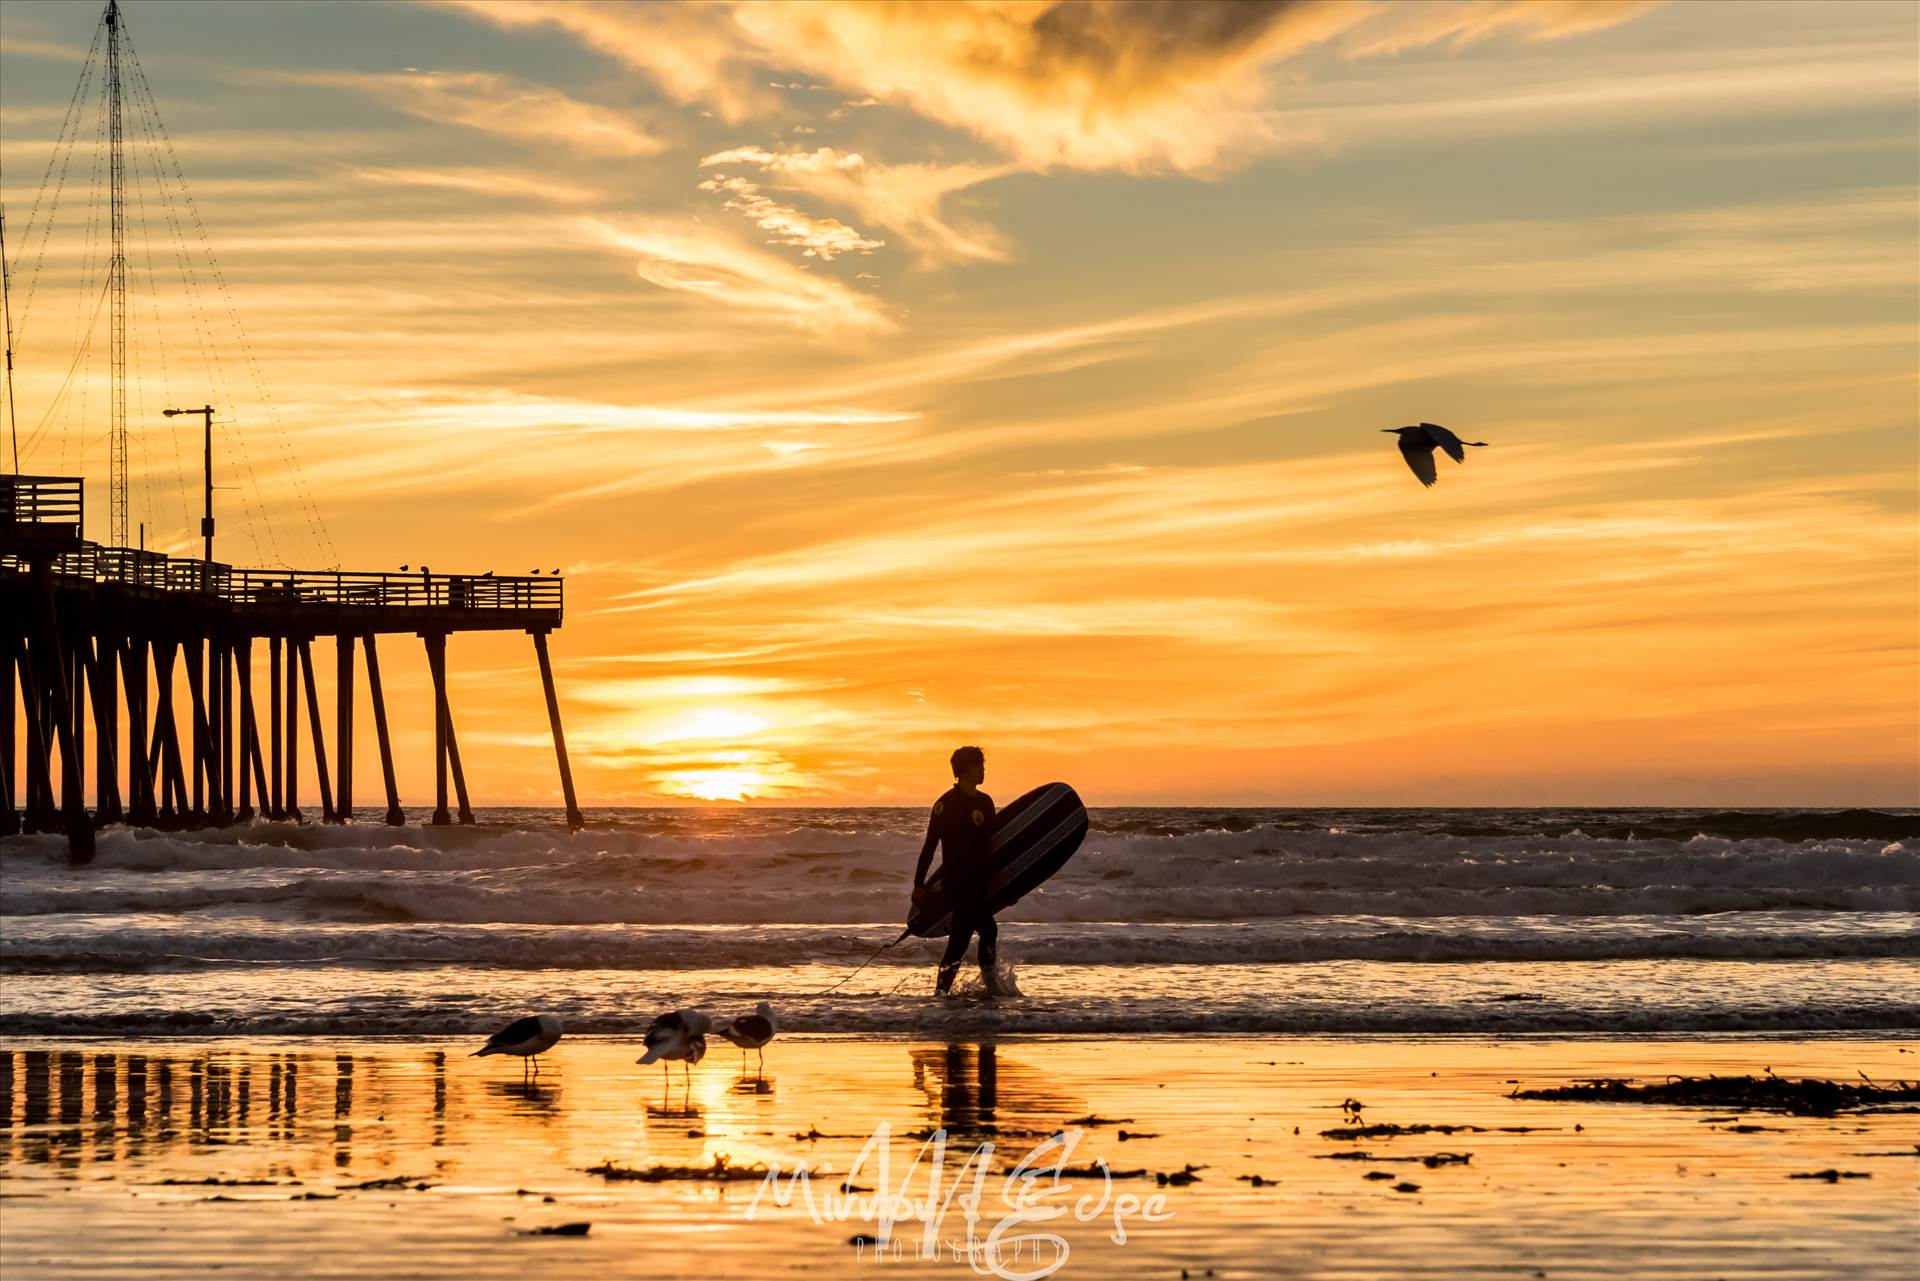 Sunset Surfing and a Flying Bird.jpg - undefined by Sarah Williams